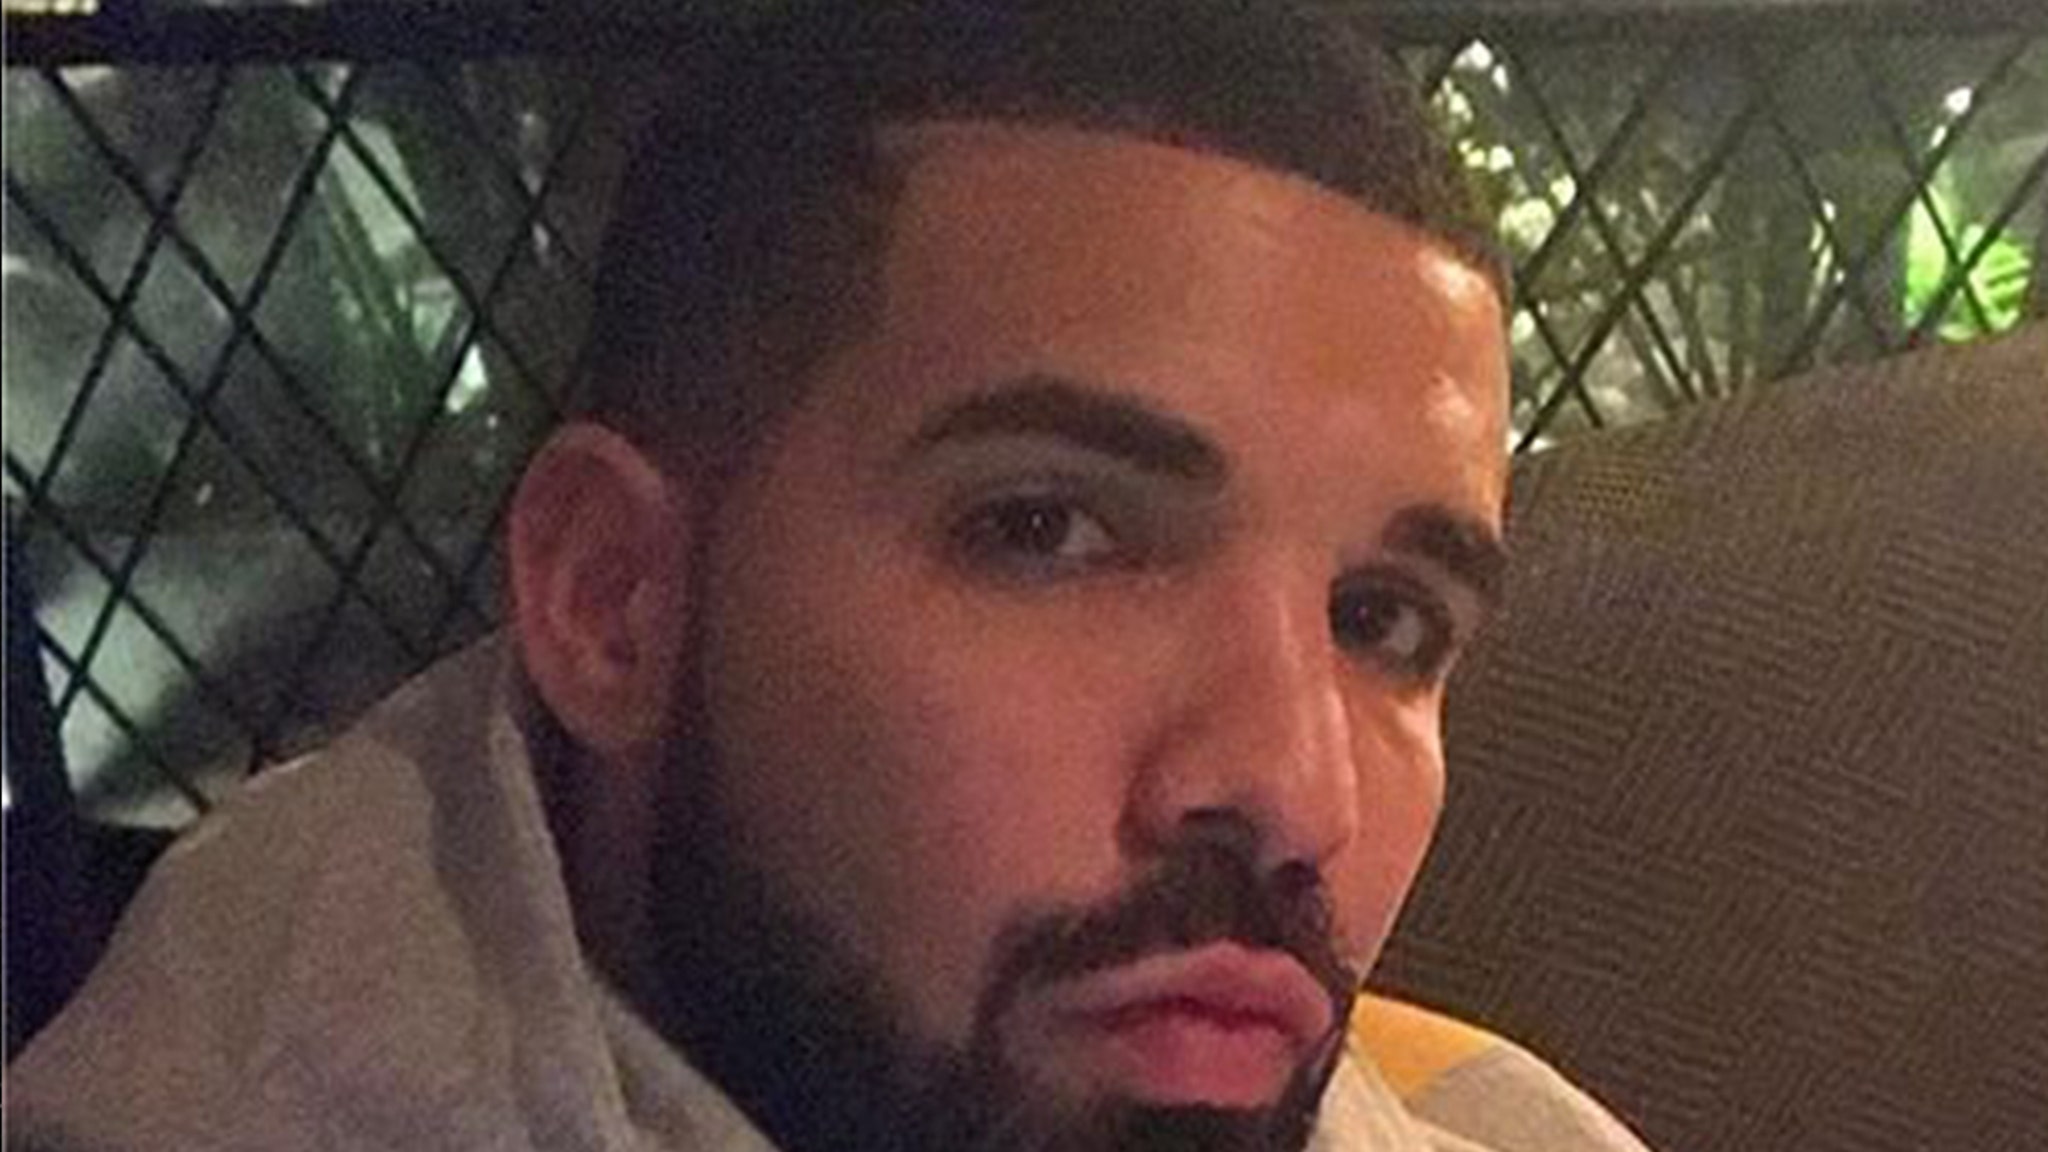 Partner Drake Champagne claims that distributor acted racist in new lawsuit